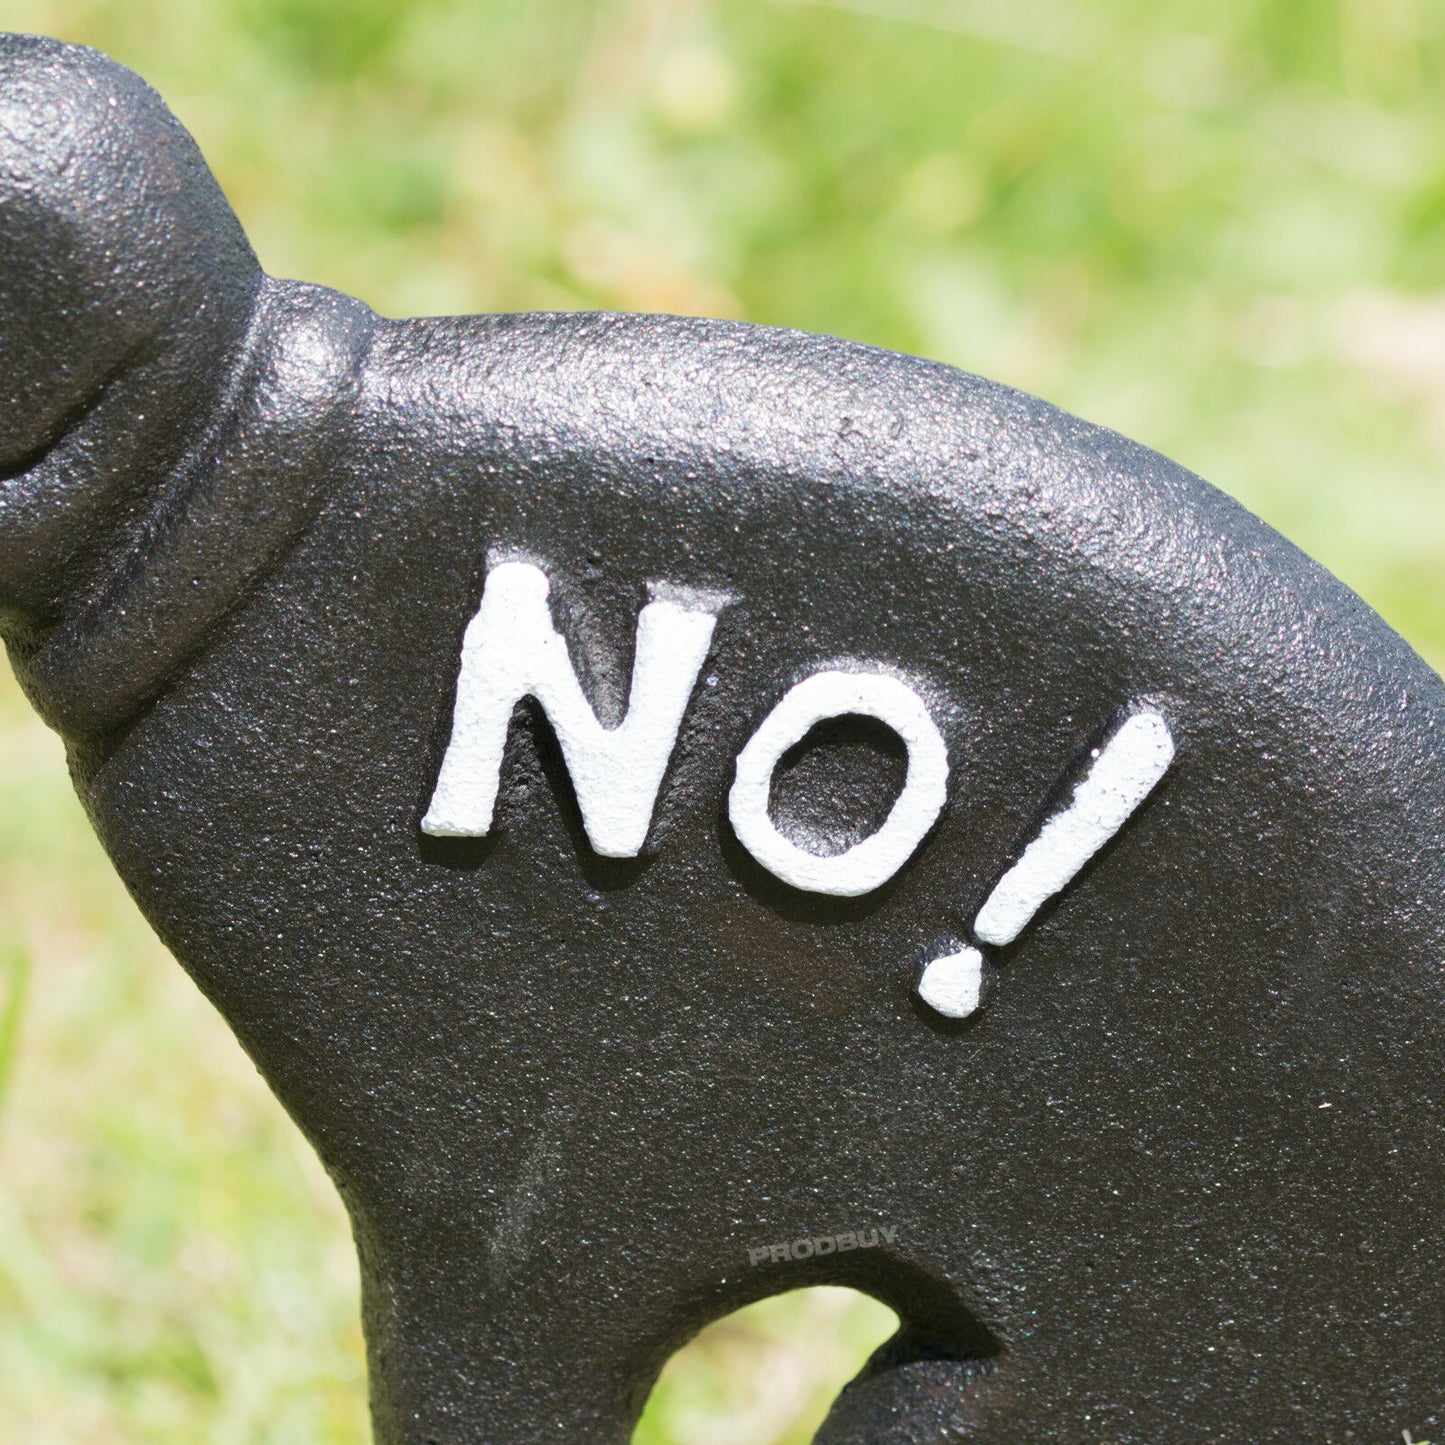 Cast Iron 'No!' Fouling Dog Poo Garden Sign